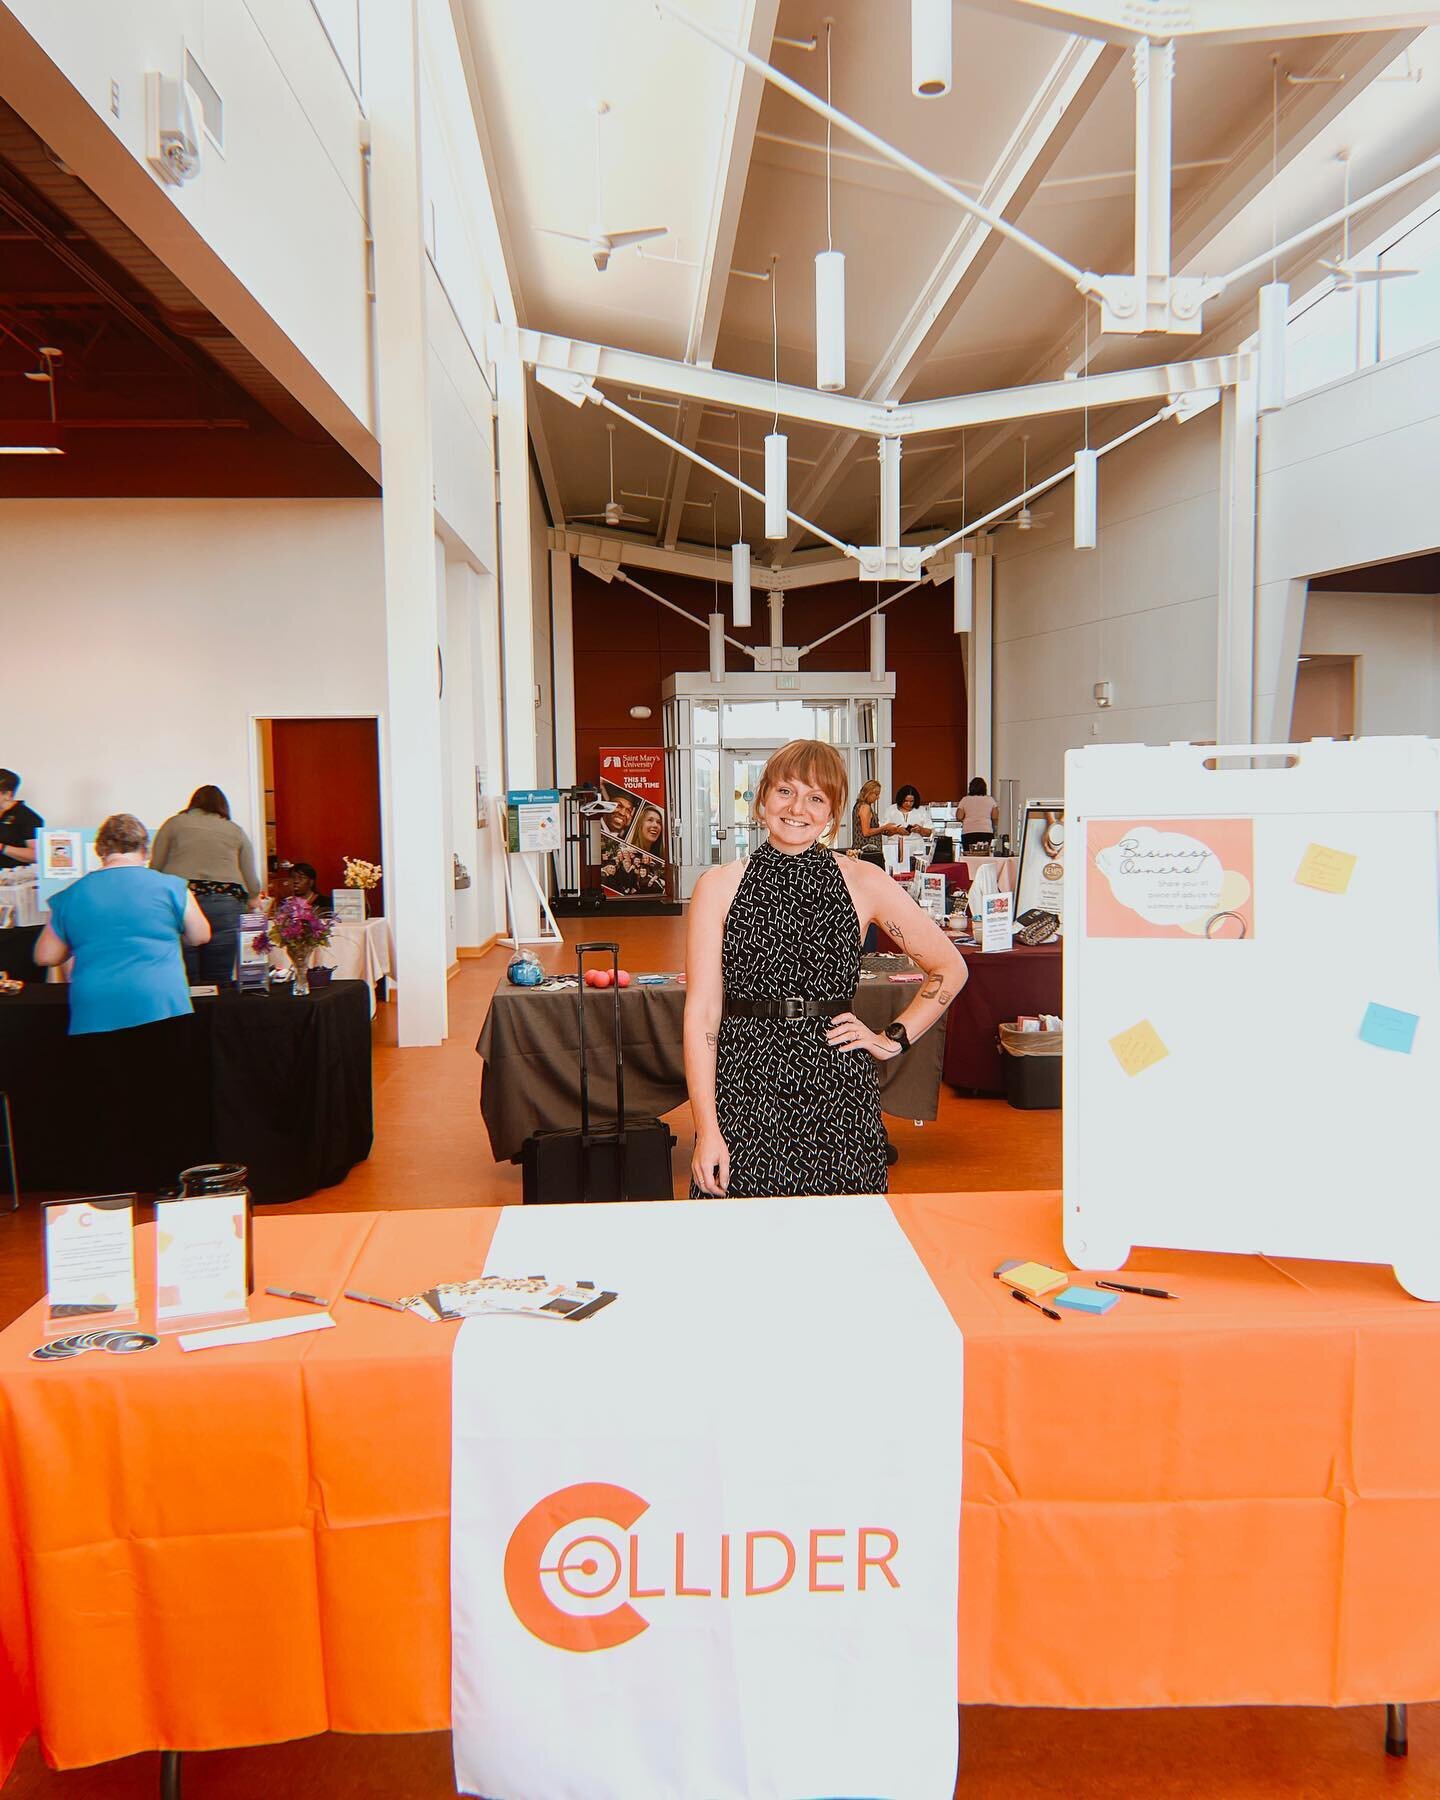 It was such a pleasure participating in the @rochwomenmag Celebrate Women in Business event! Excellent panelists, vendors, food, drink, and celebration with so many wonderful women! Thank you for having us! 
.
.

#collidermn #coworkingspace #coworkin